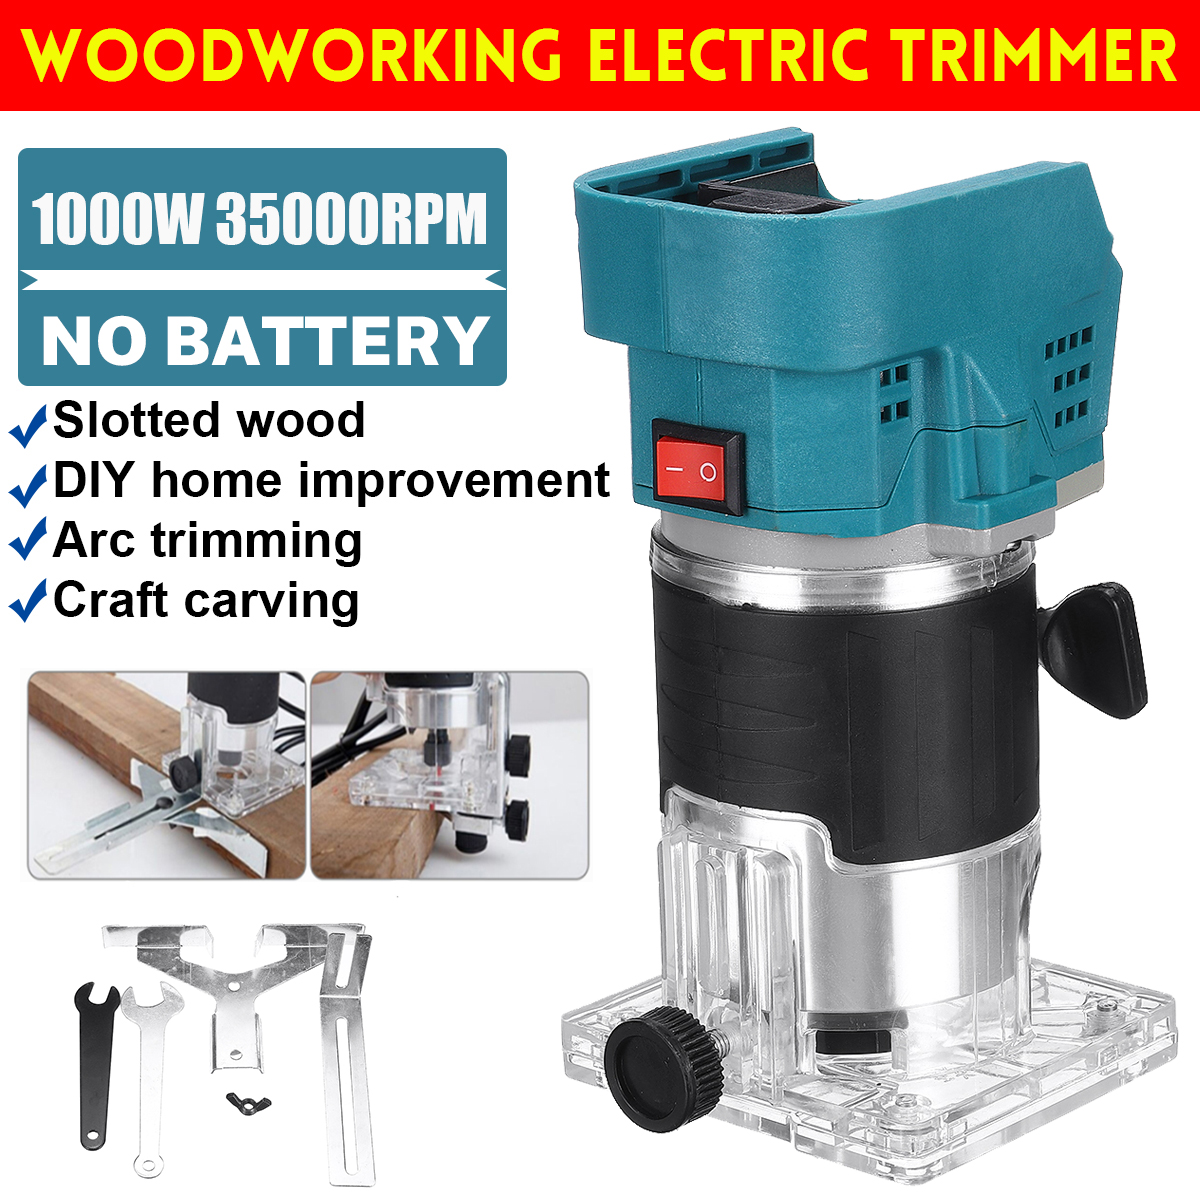 1000W-35000RPM-Electric-Hand-Trimmer-Woodworking-Wood-Milling-Machine-Without-Battery-For-Makita-Bat-1851537-2